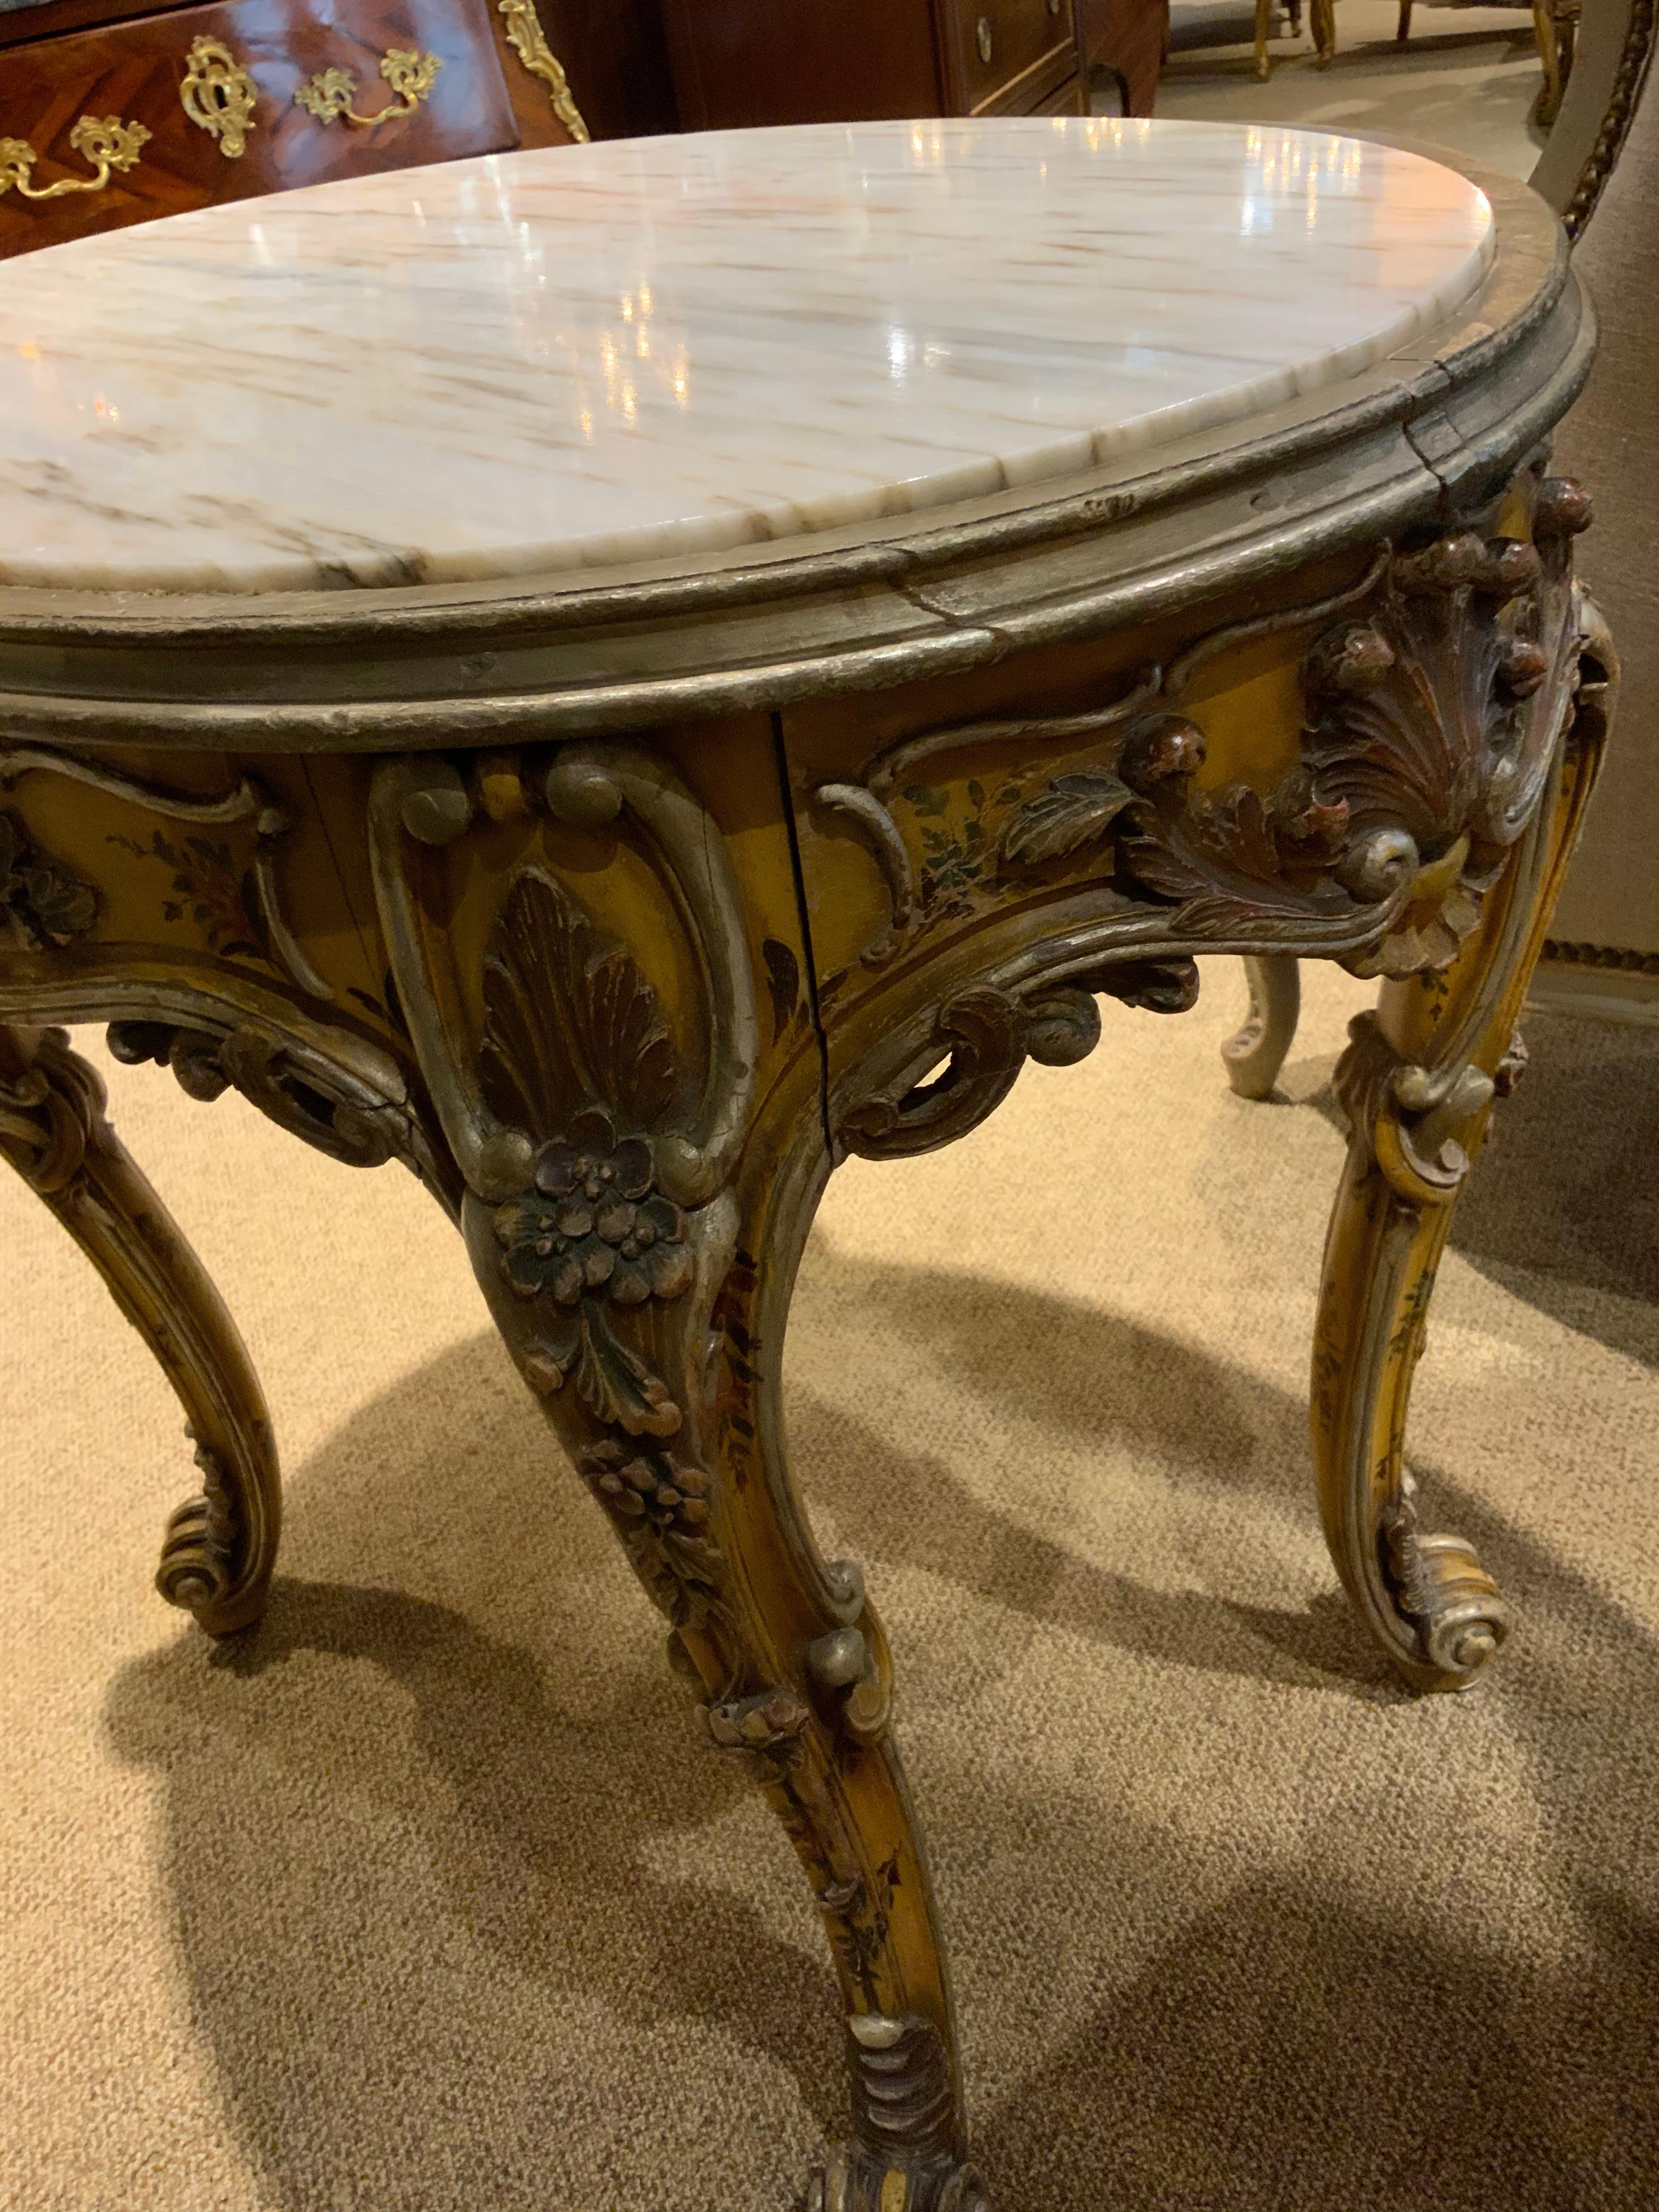 Polychromed Oval Venetian Carved and Polychrome Table with a Cream, Gold and Pale Gray Veins For Sale